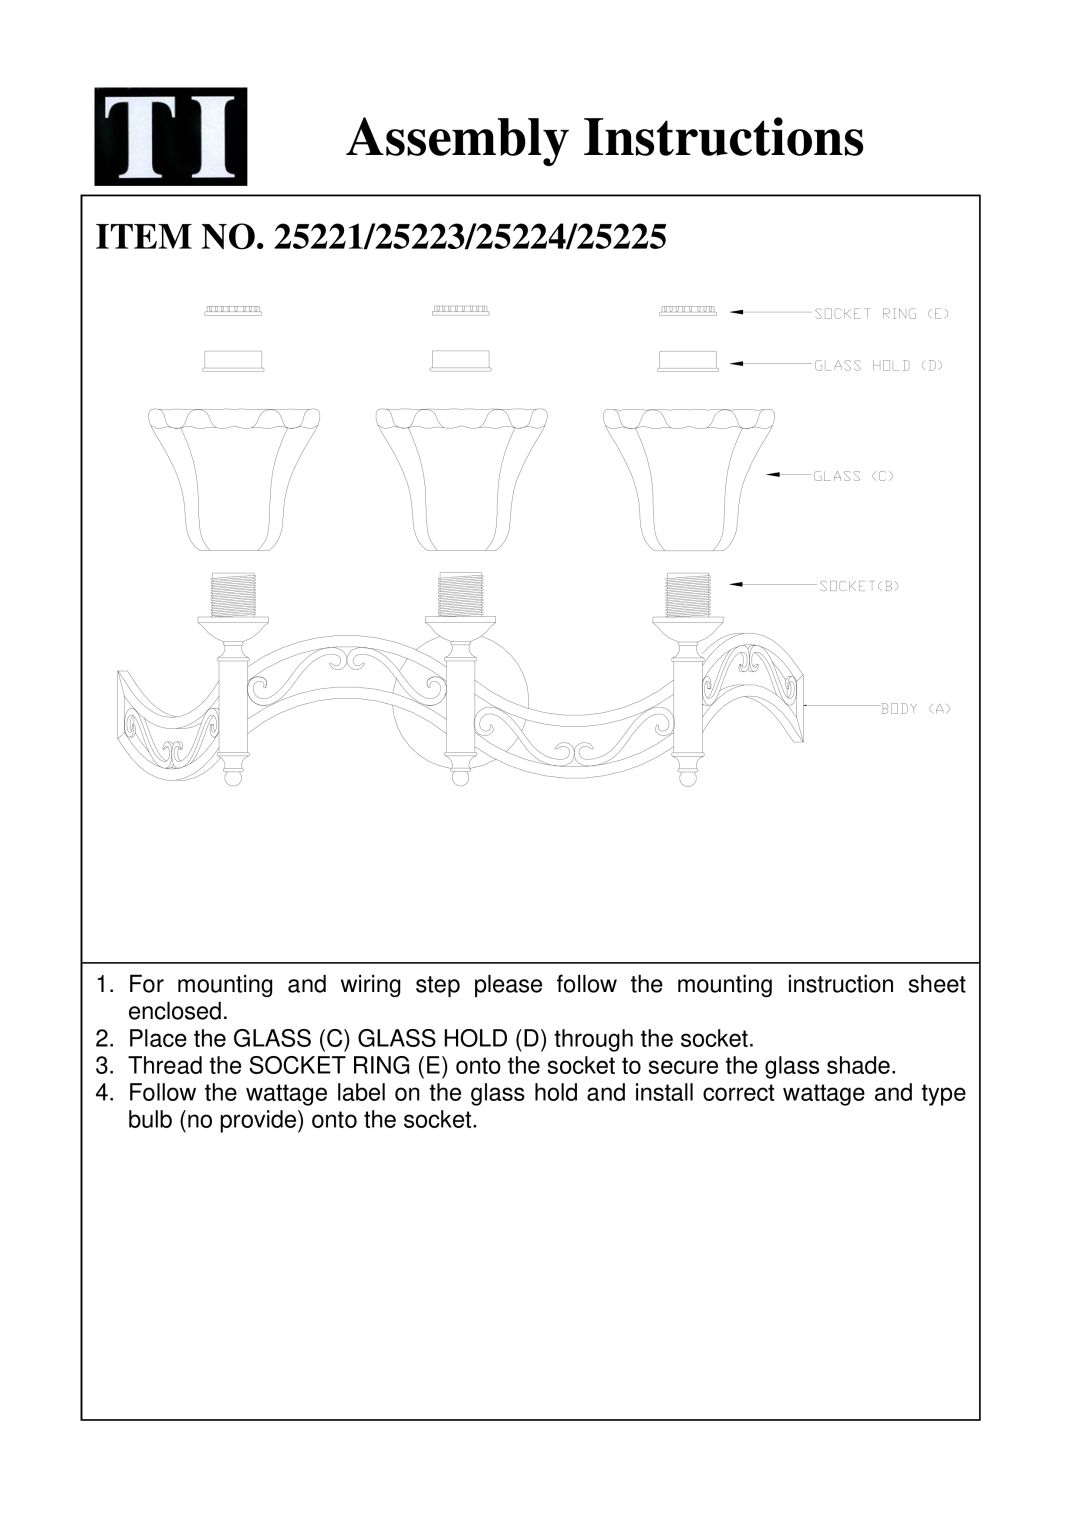 Triarch instruction sheet Assembly Instructions, ITEM NO. 25221/25223/25224/25225 